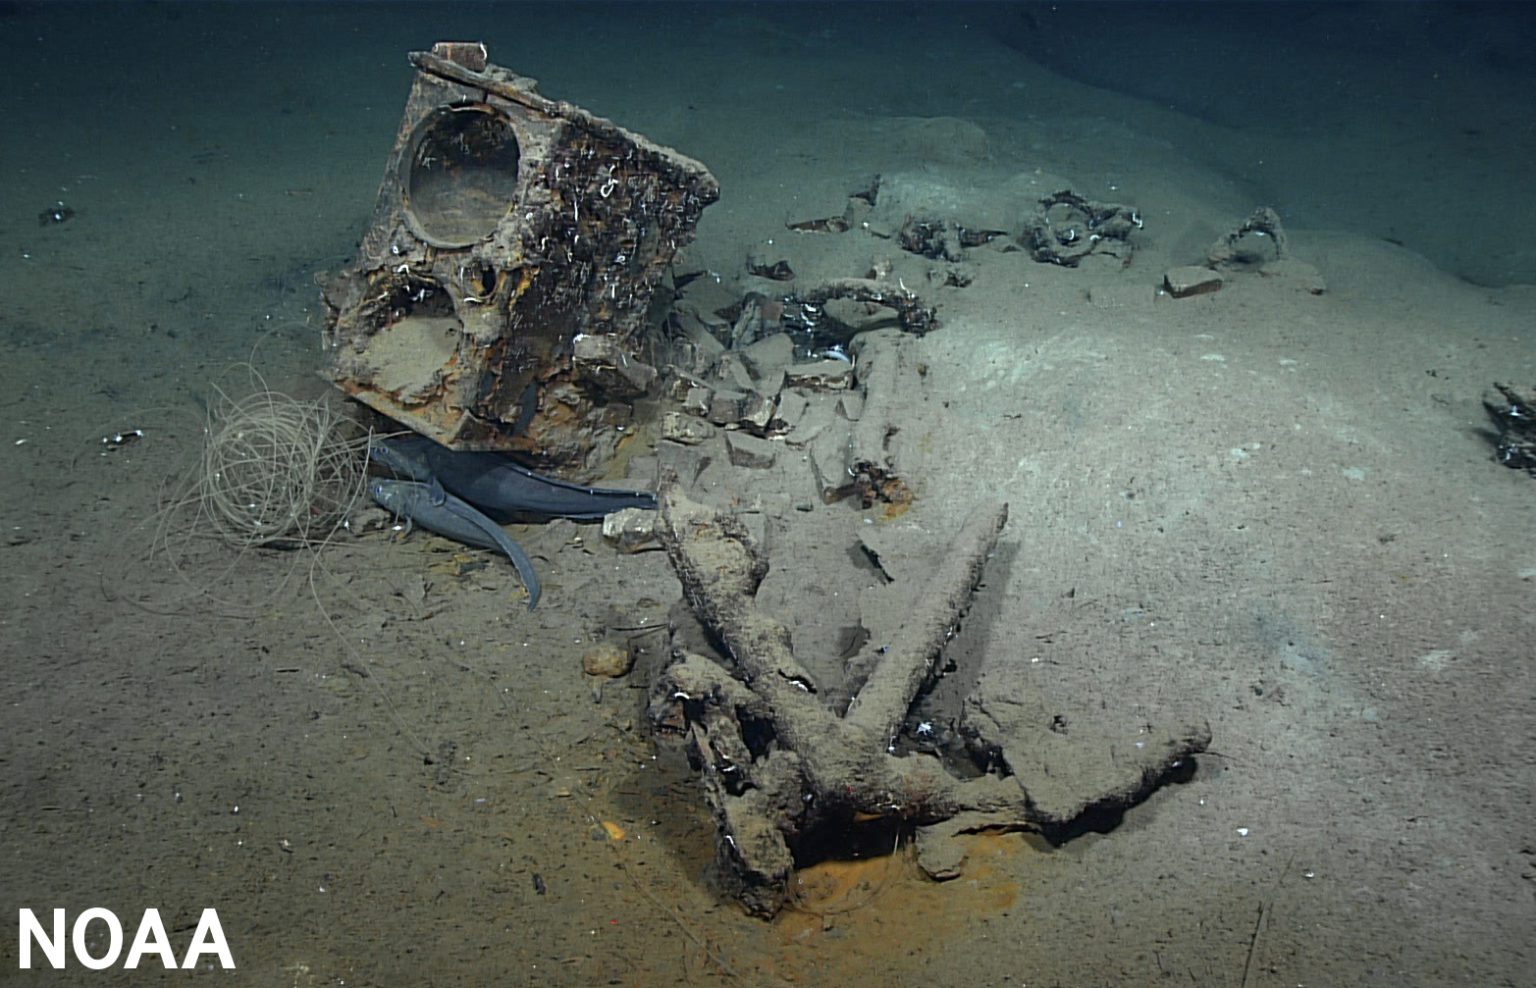 https://gcaptain.com/wp-content/uploads/2022/03/PHOTO-Tryworks-and-broken-anchor-found-on-Industry-wreck-022522-NOAA-Ocean-Exploration-1536x988.jpg